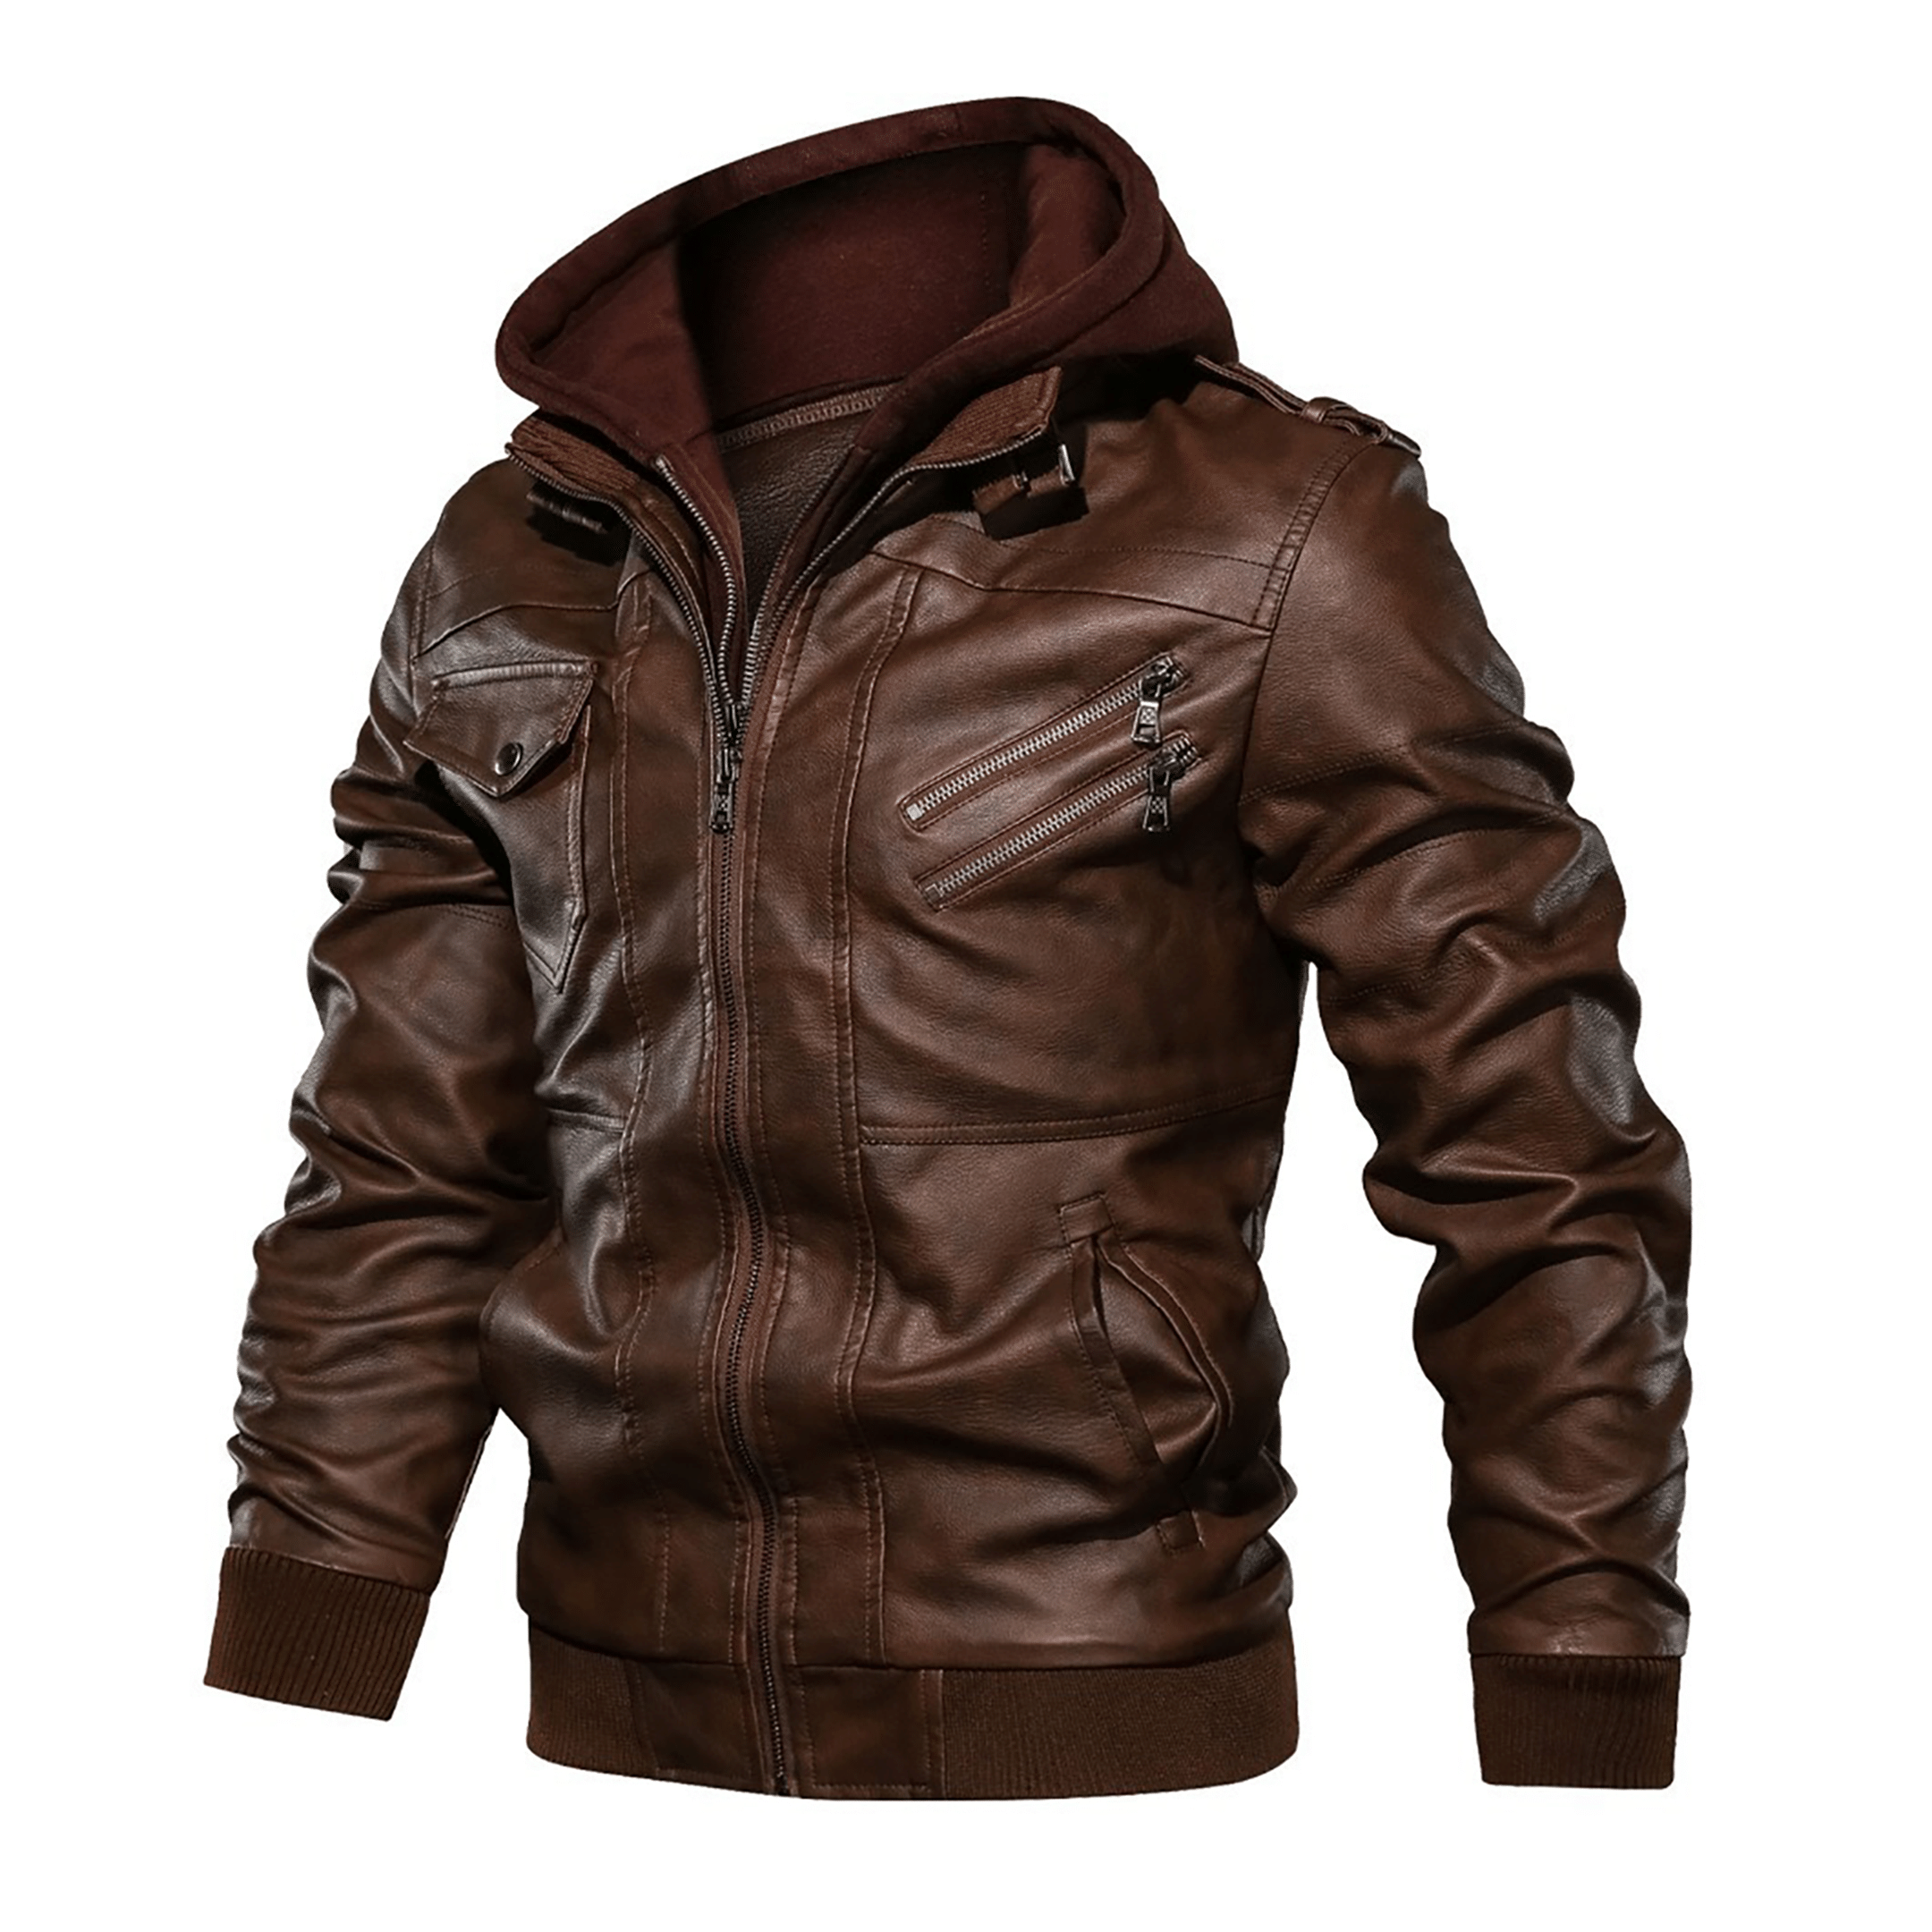 Top leather jackets and latest products 369